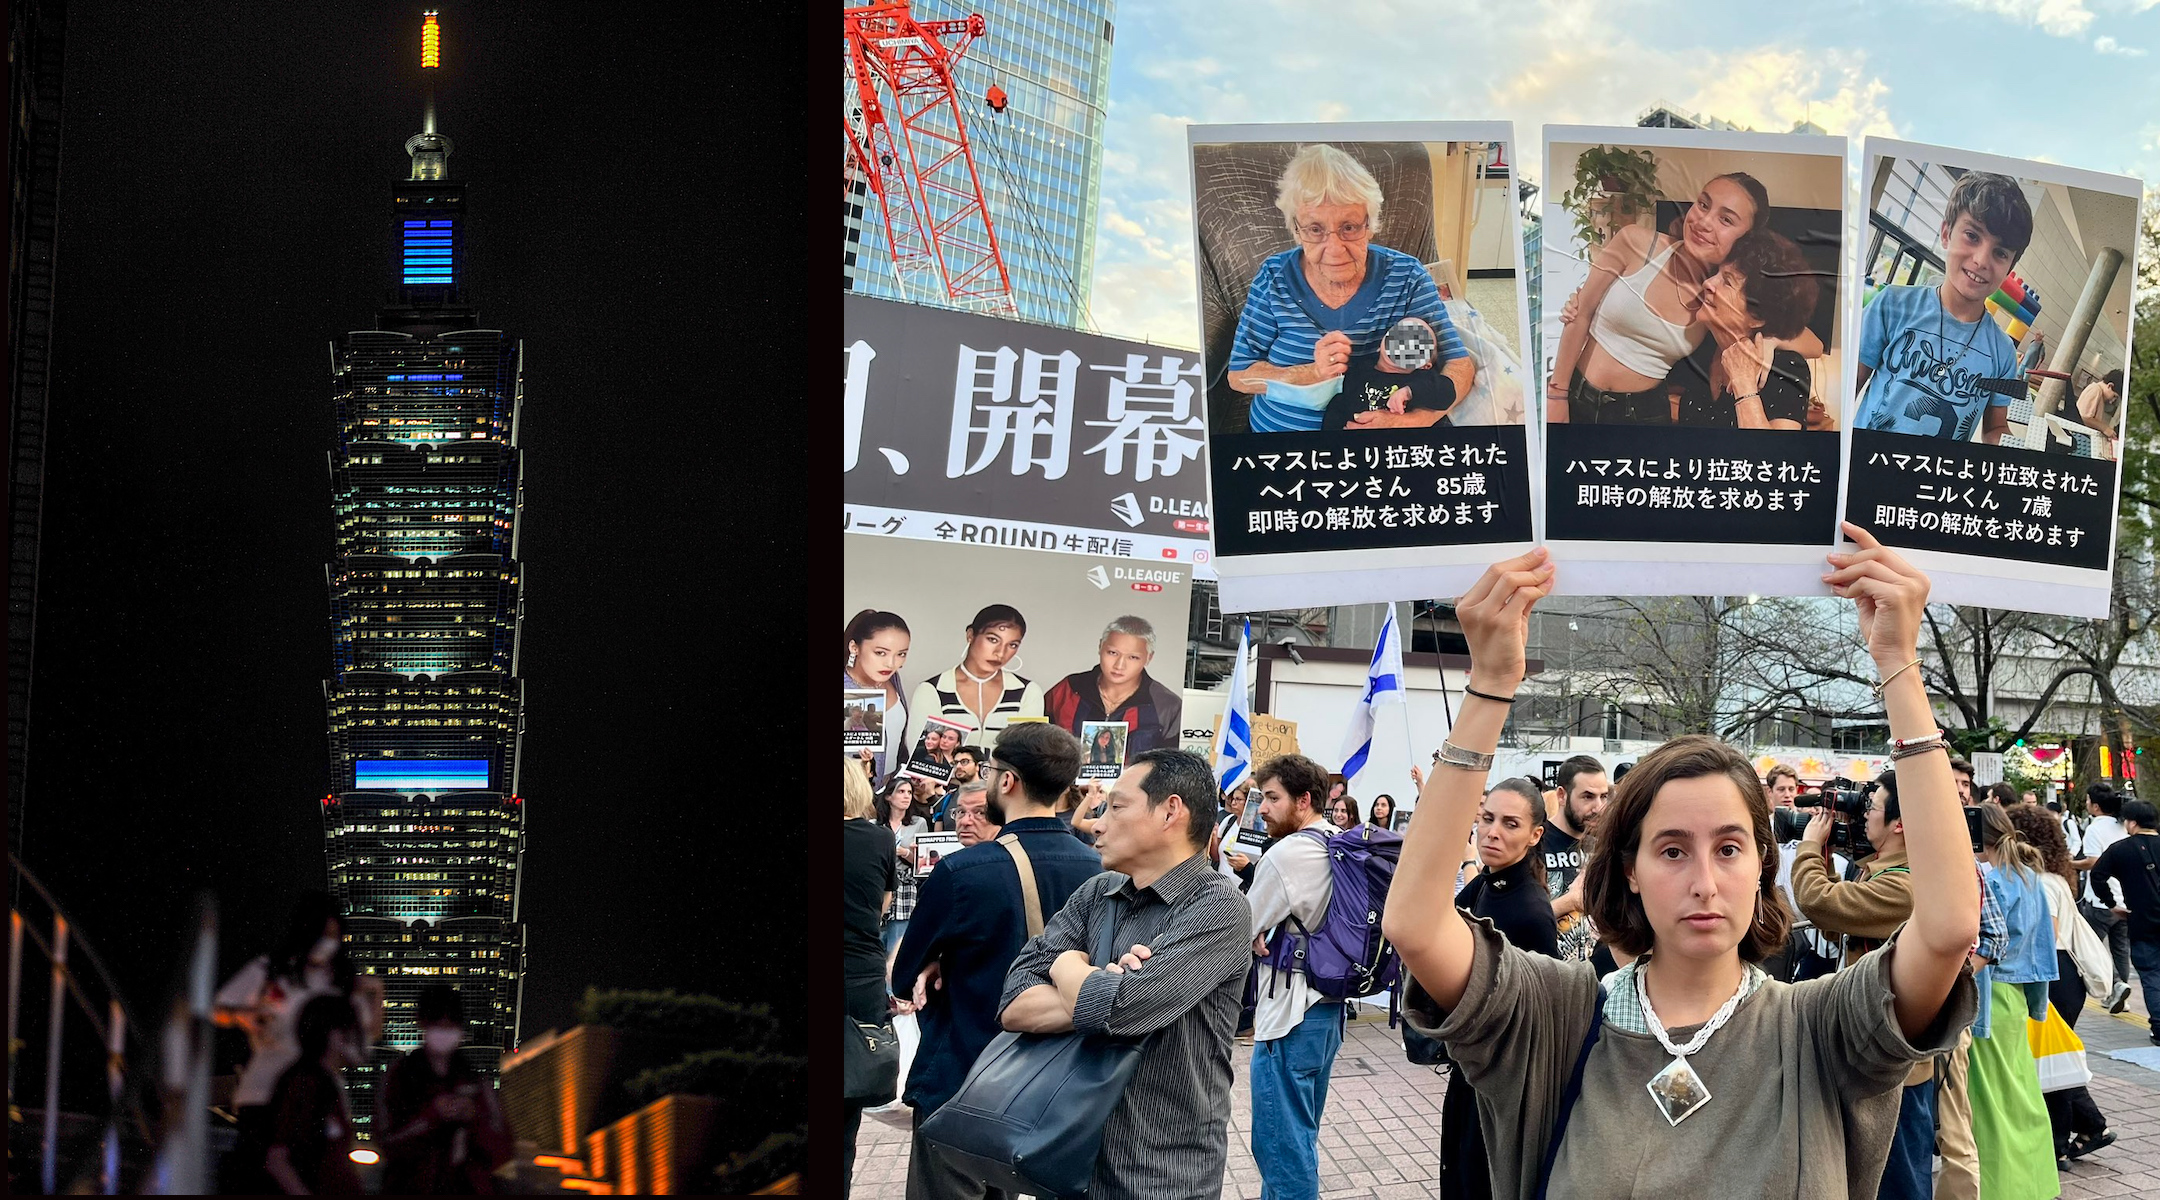 Taipei 101, a landmark building in Taiwan, is illuminated in blue and white to support Israel, while a woman holds up Japanese-language posters featuring Israelis who have been taken hostage by Hamas during a rally in Tokyo, Oct. 11, 2023. (Sam Yeh/AFP via Getty Images, Twitter)